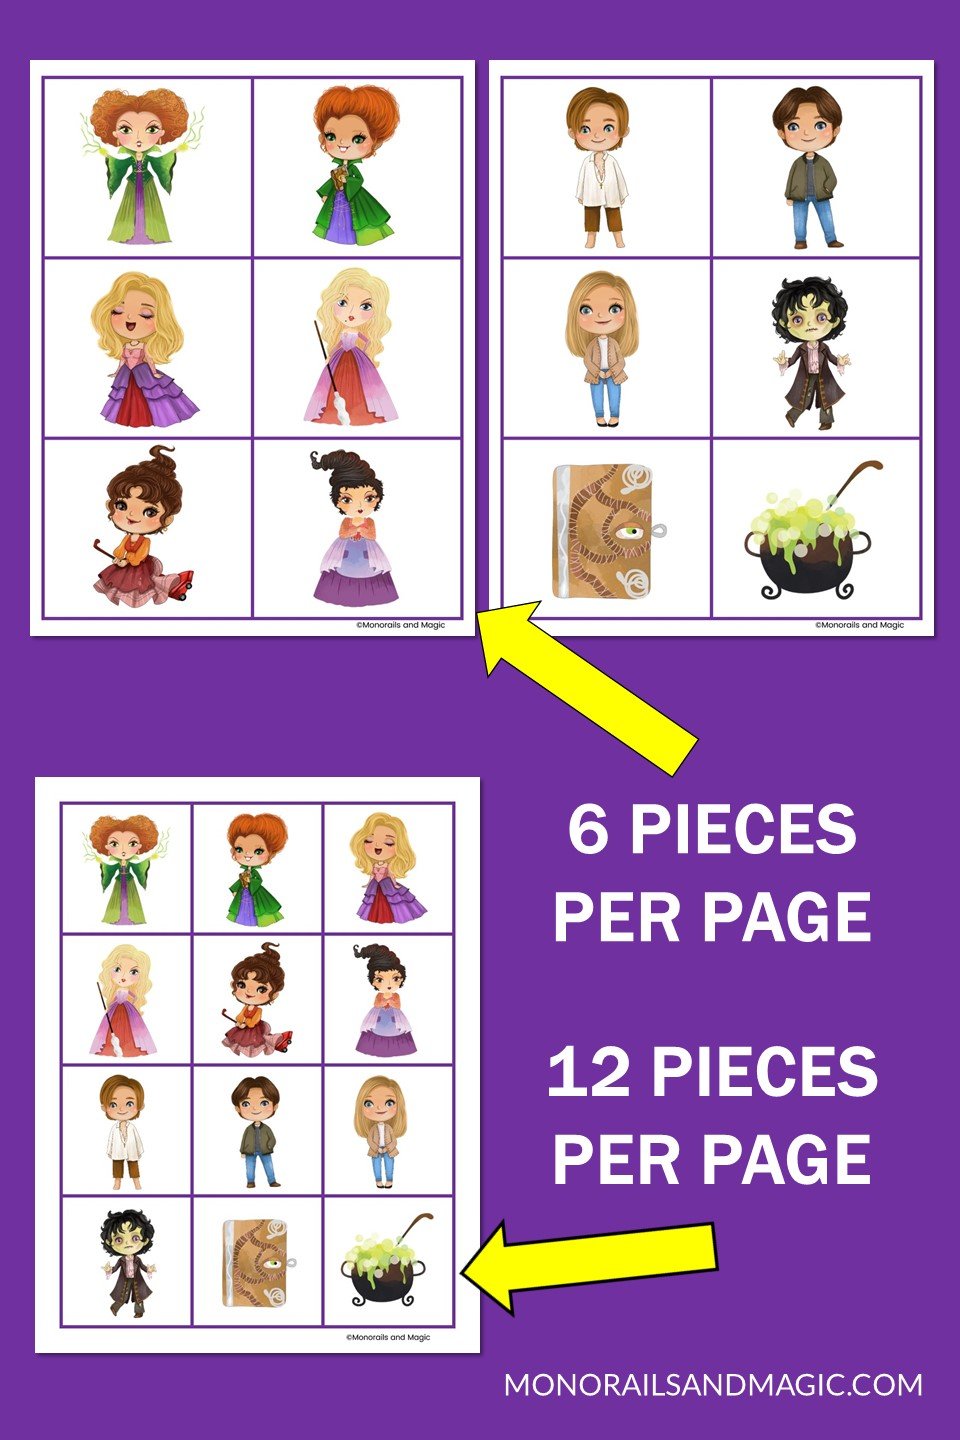 Pieces from the free printable Hocus Pocus memory game for kids.